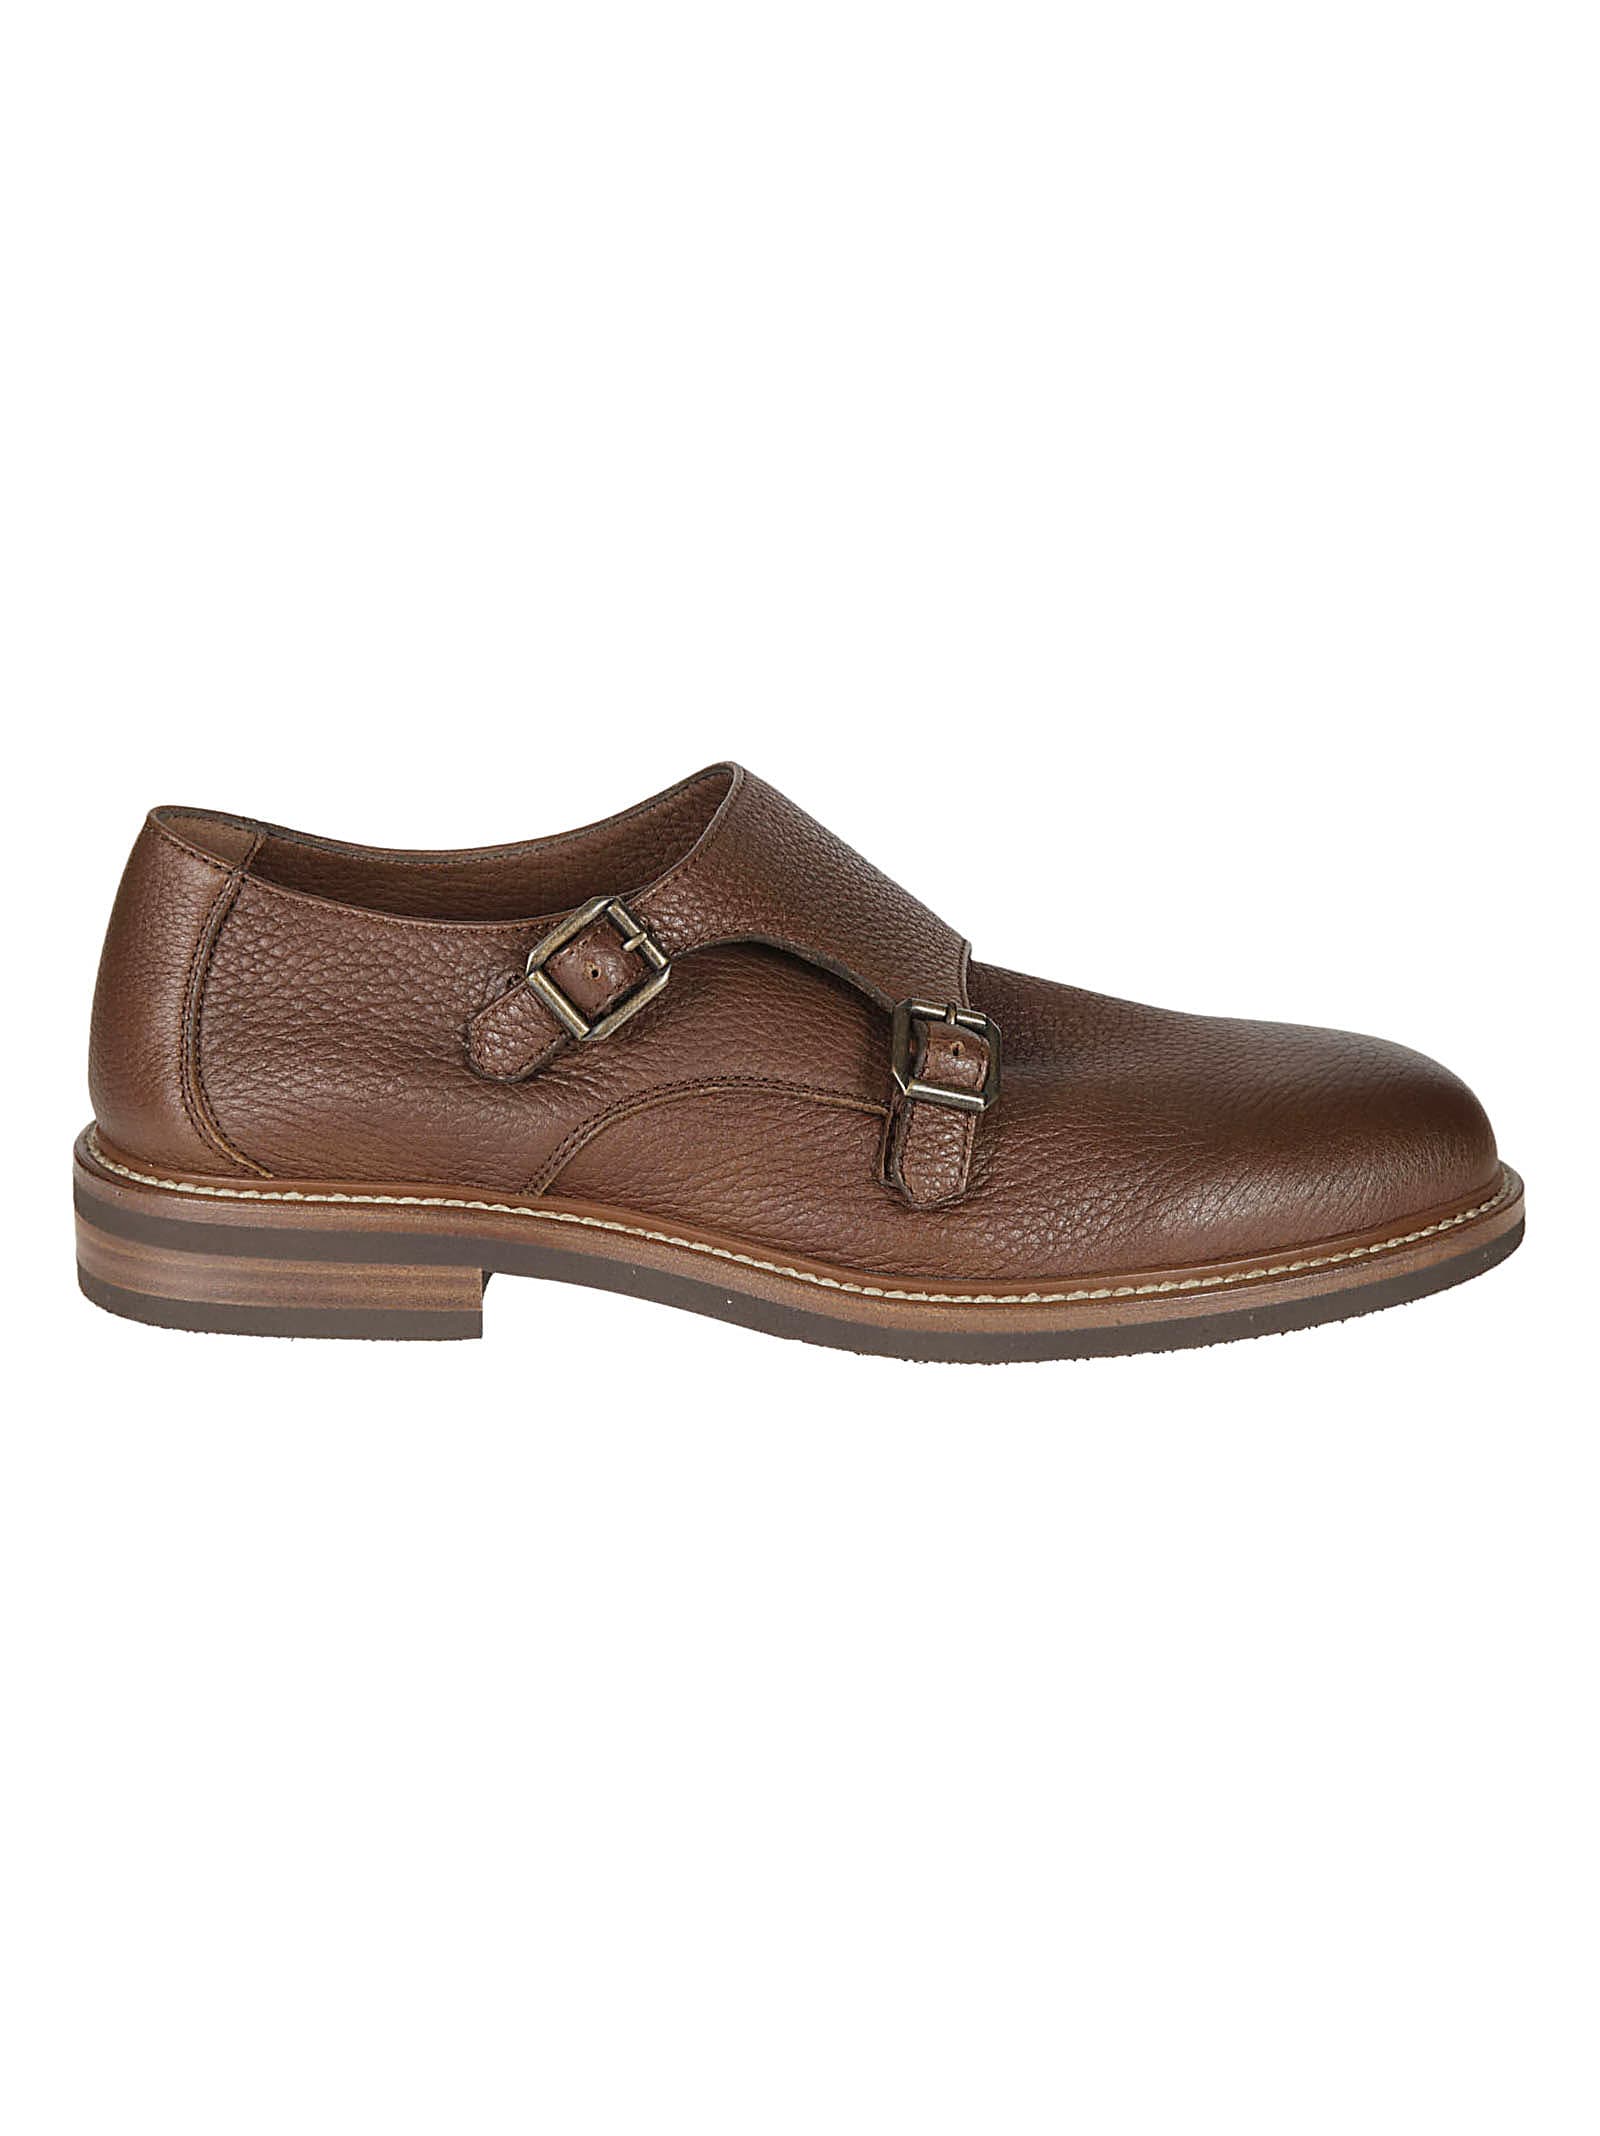 Brunello Cucinelli Double Buckle Classic Monk Shoes In Mud